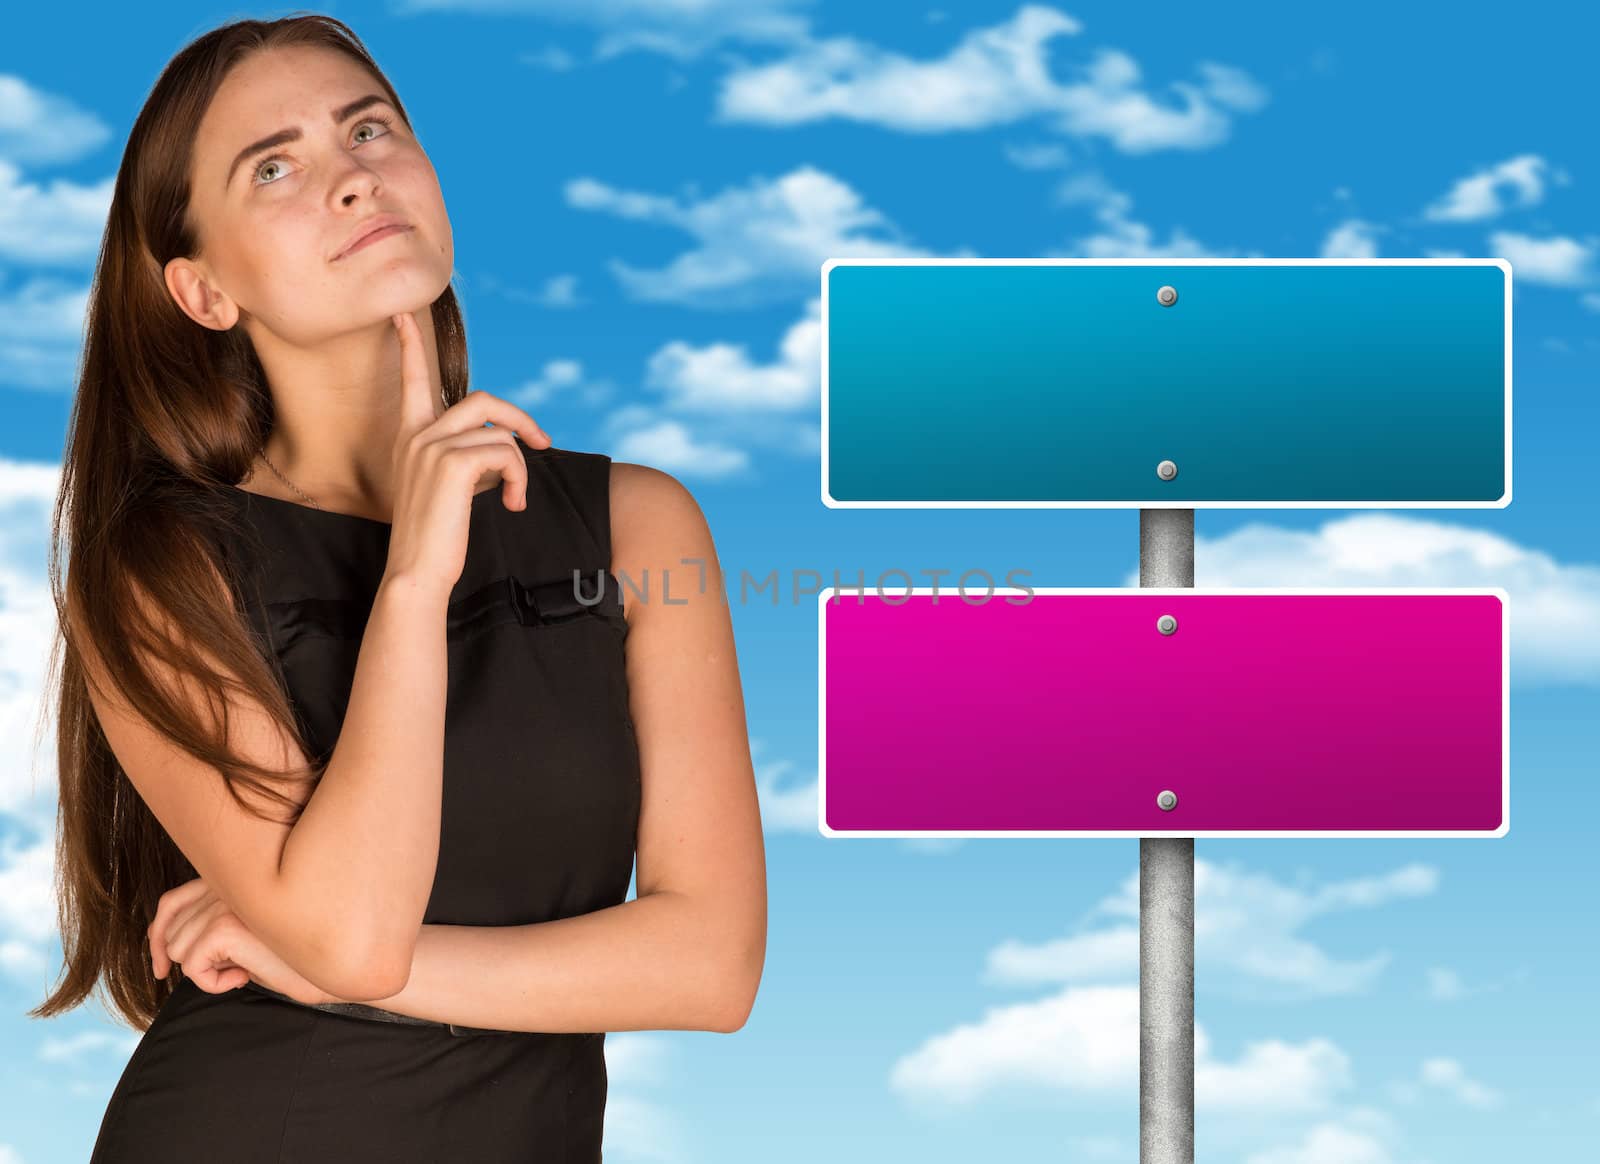 Lost in thought businesswoman. Crossroads road sign as backdrop